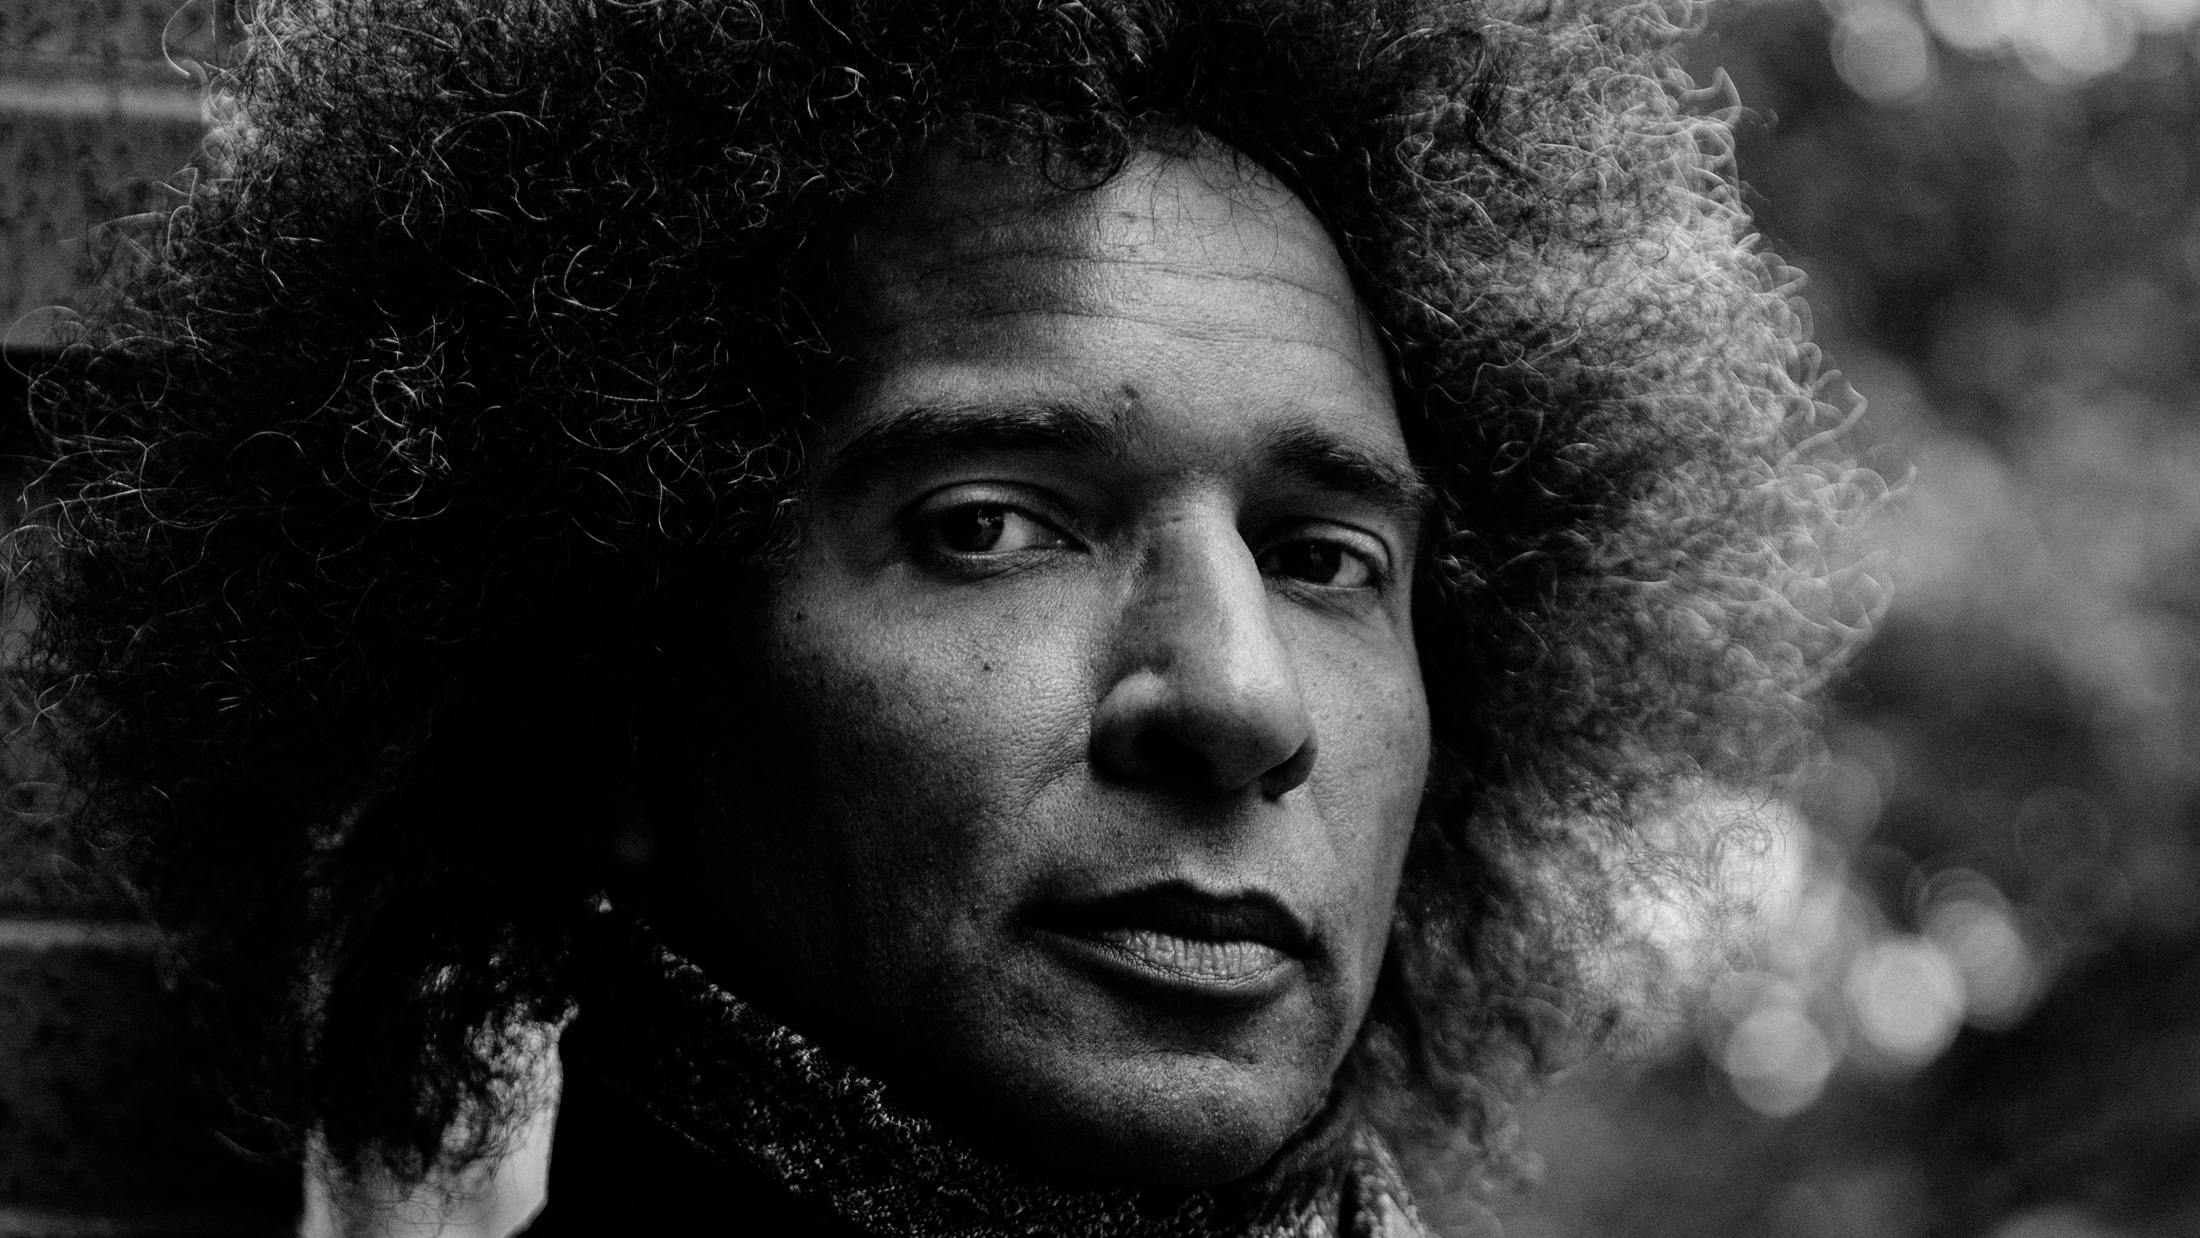 William DuVall: “Nothing prepares you for your gigs being invaded, or for Nazi skinheads putting a contract out on you”